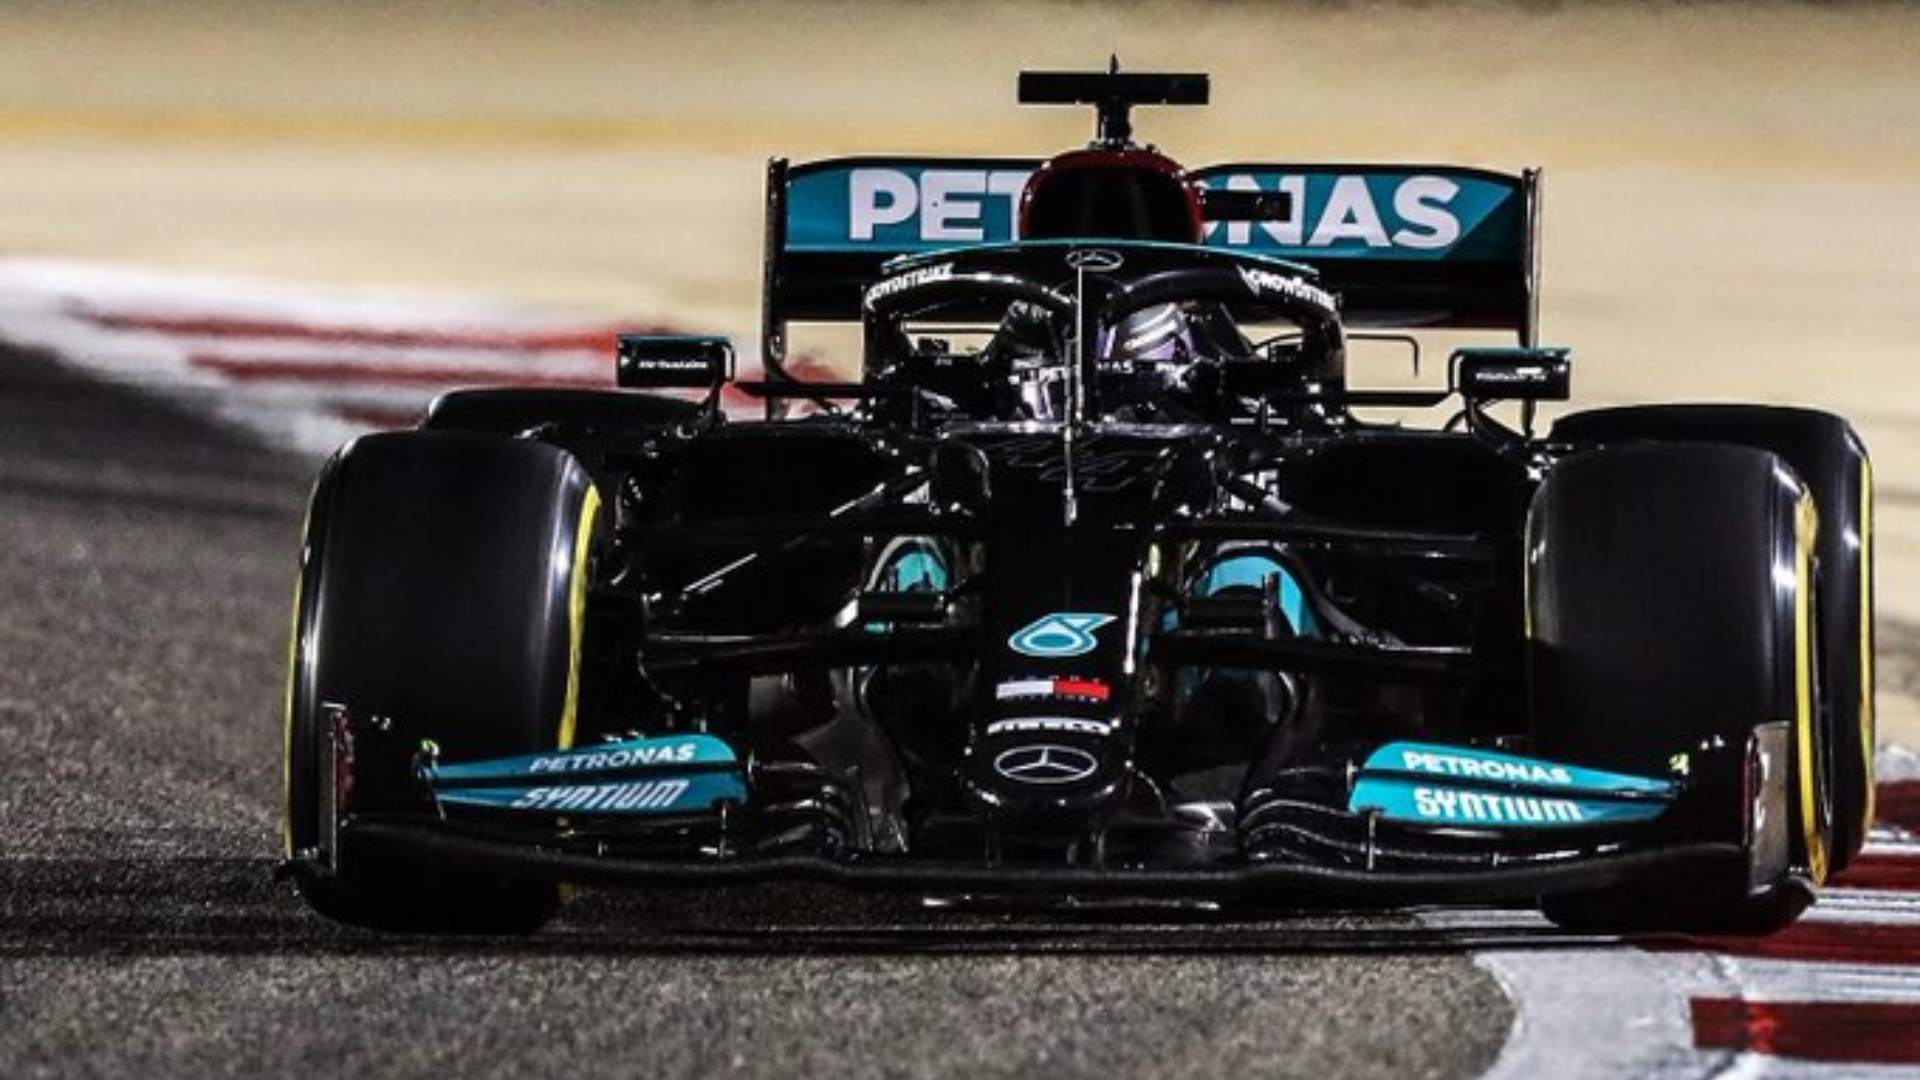 Lewis Hamilton and Max Verstappen were caught in a controversy over the track limit in Bahrain in 2021 F1 season.